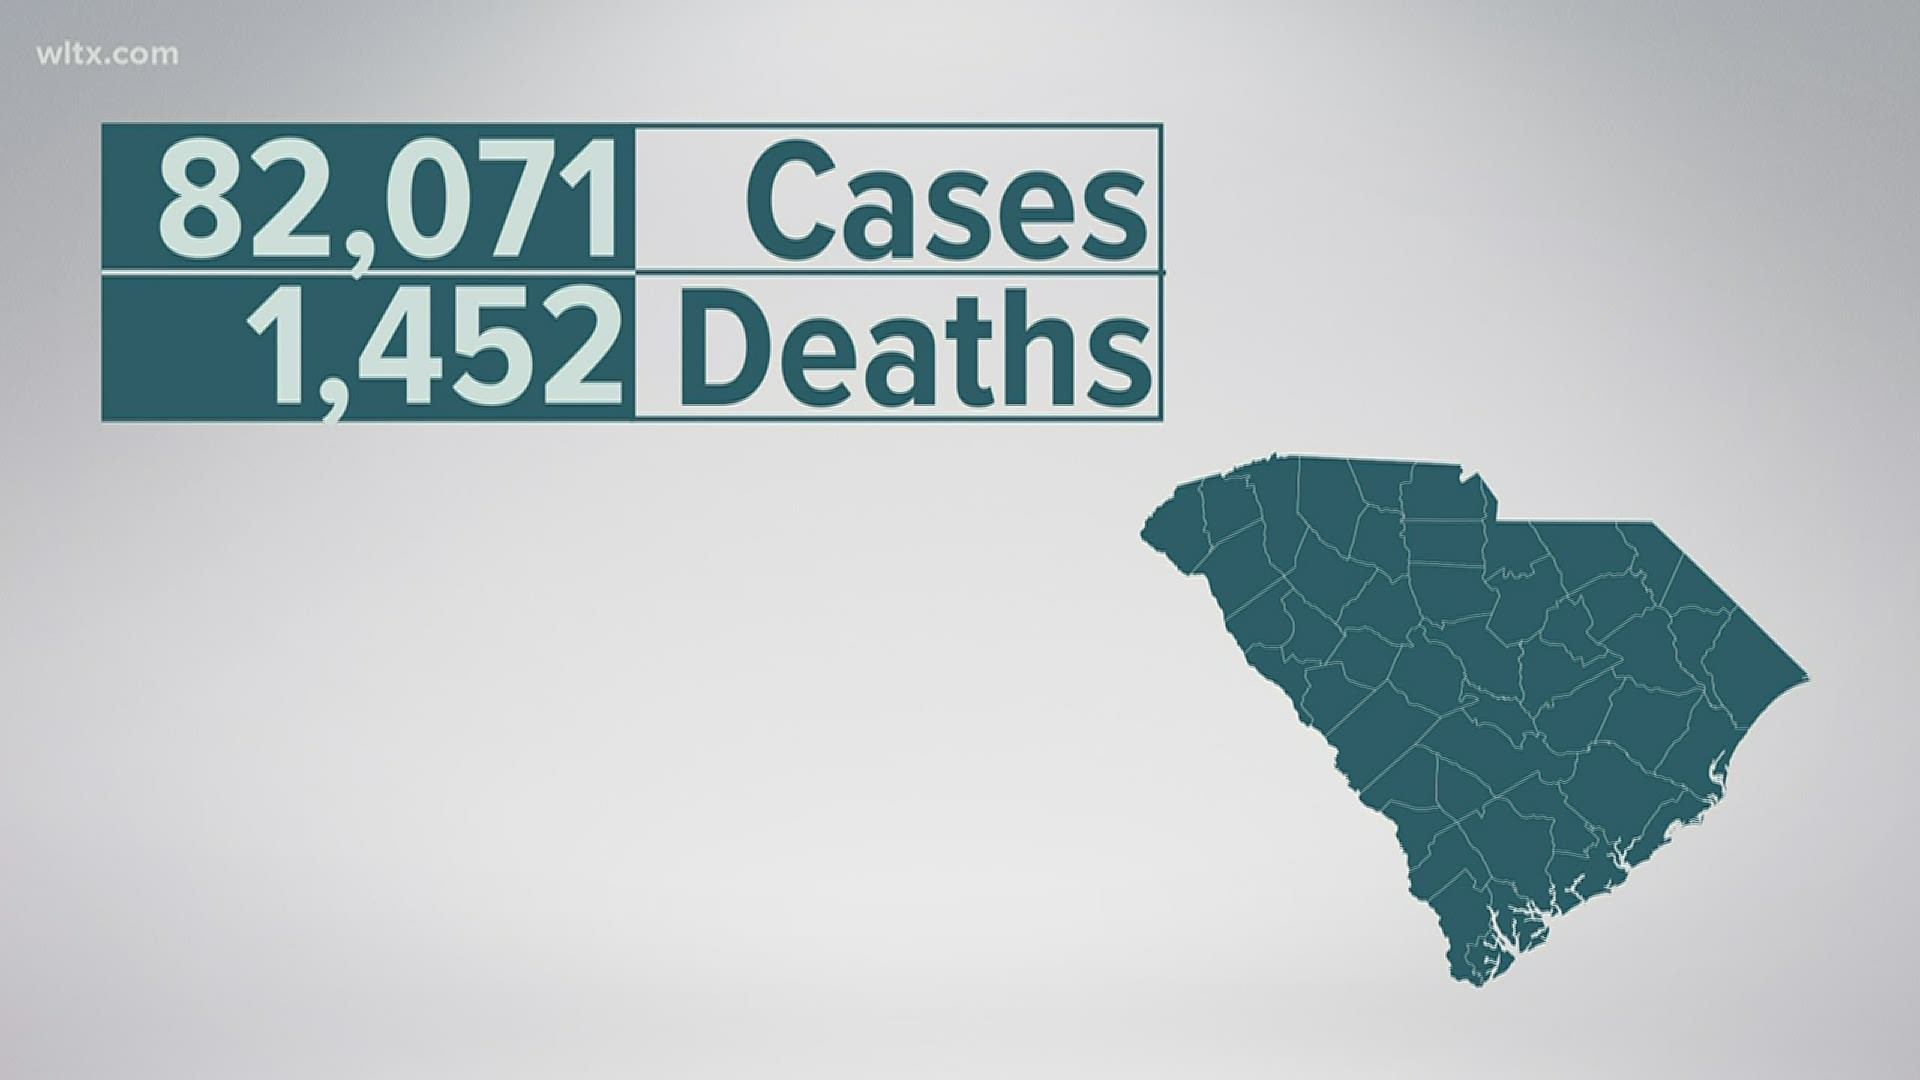 This brings the total number of confirmed cases to 82,071, probable cases to 346, confirmed deaths to 1,452, and 54 probable deaths.